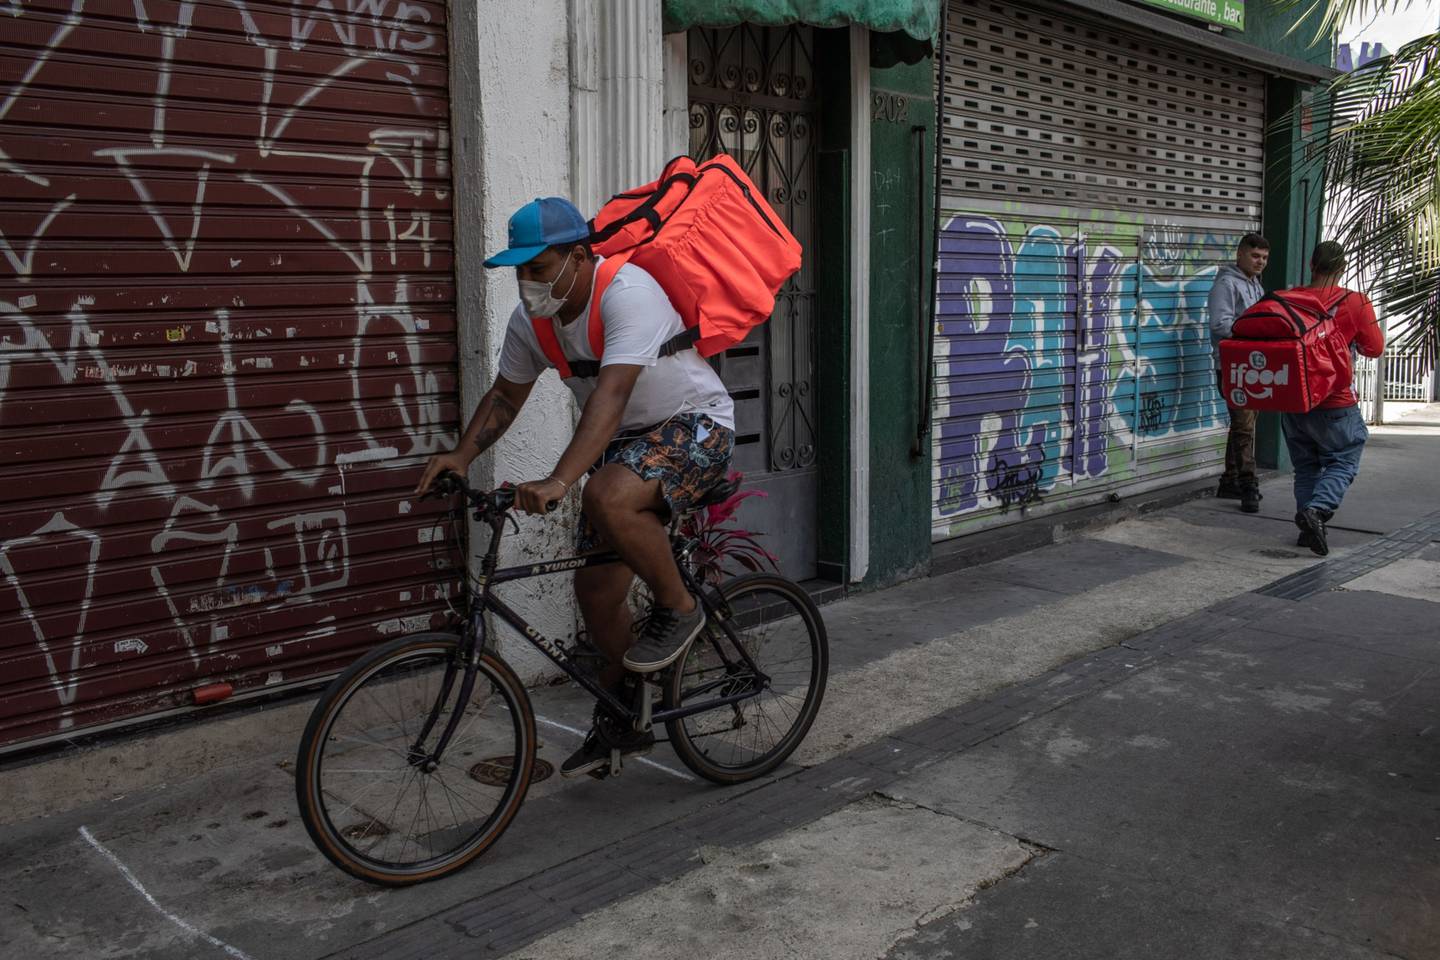 A worker wears a protective mask while making a Rappi app delivery in São Paulo, Brazil, on Wednesday, April 1, 2020. Photographer: Victor Moriyama/Bloomberg